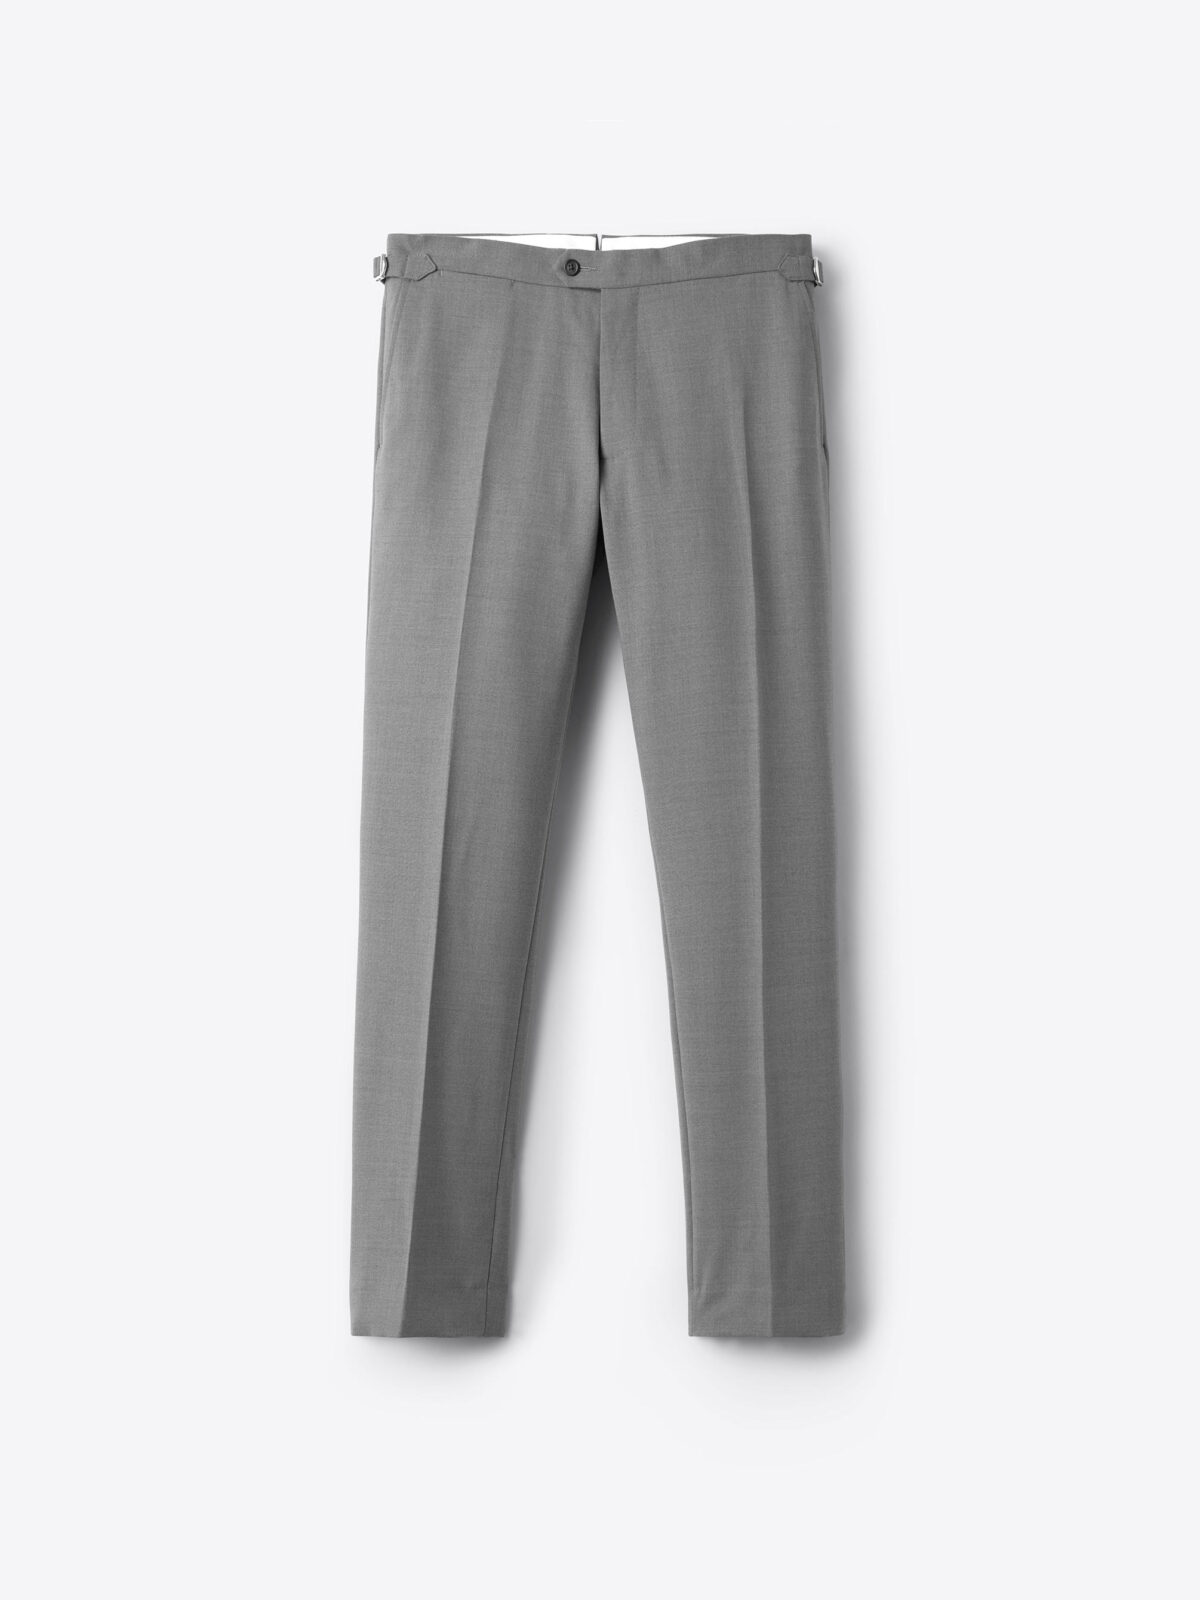 Alex | Ankle Length Medium Weight Tapered Men’s Pants with Pockets